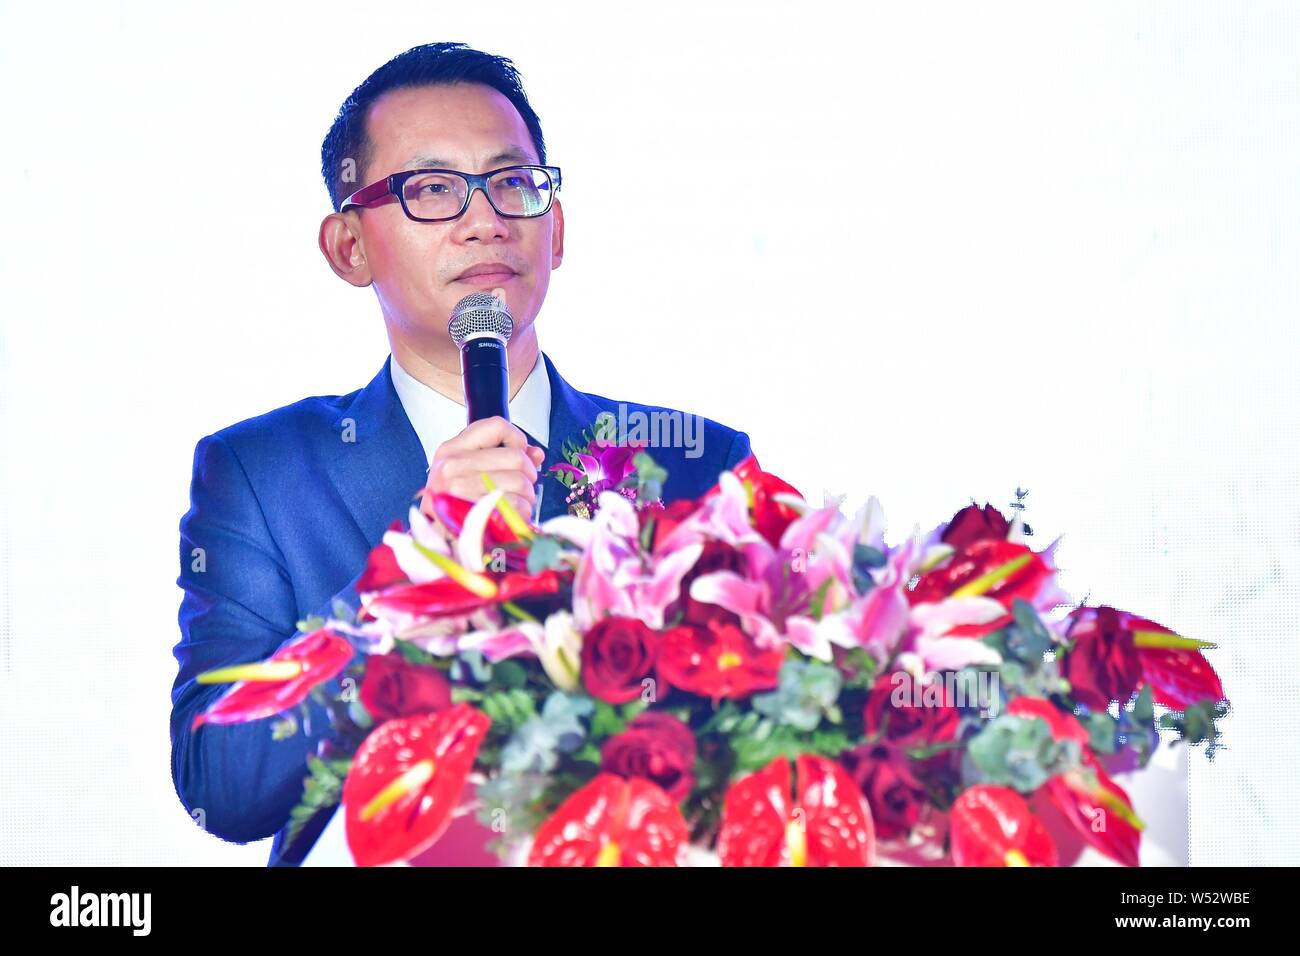 Shan Dawei, chairman of UB Group and genaral manager of creb.com, attends the 20th China International Real Estate & Architectural Technology Fair in Stock Photo